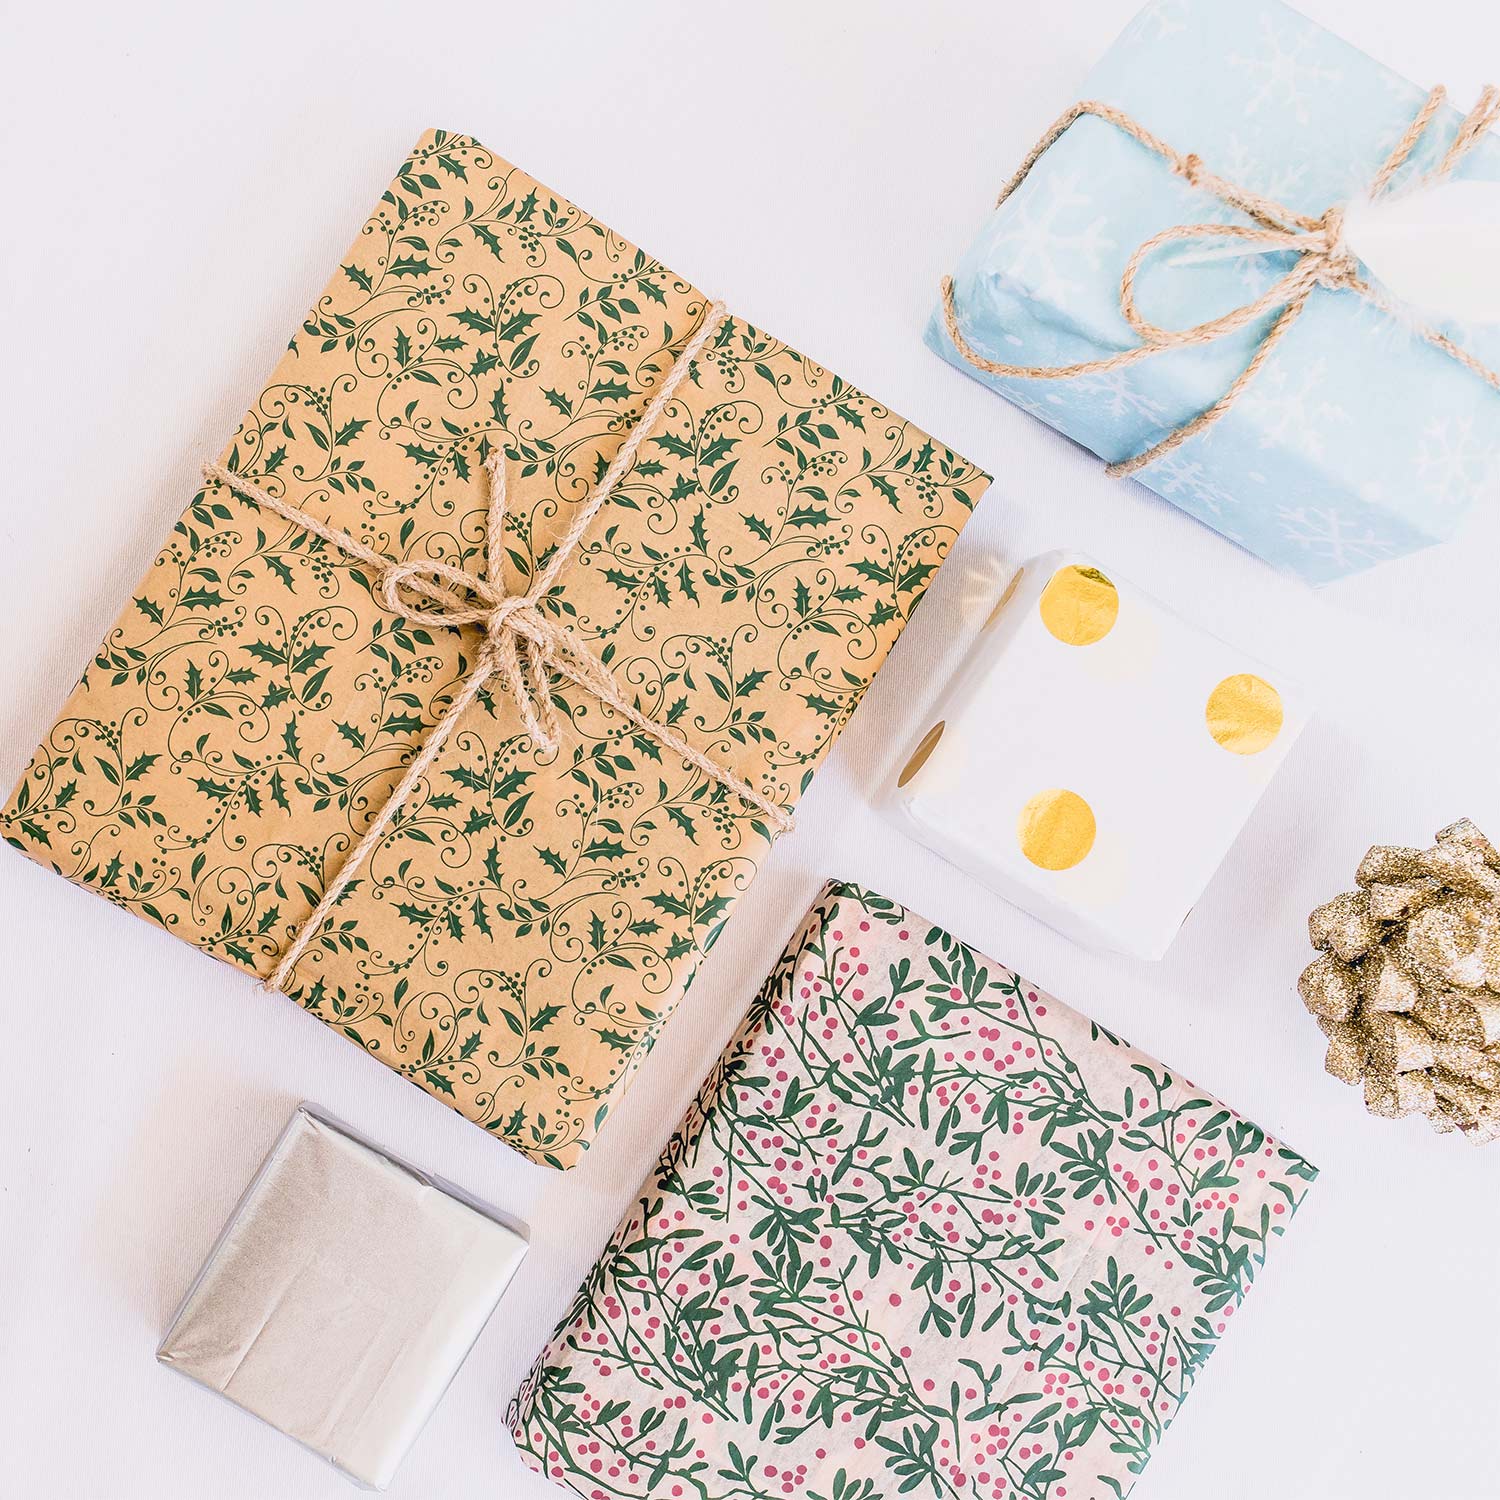 Image of four wrapped gifts in wrapping paper with different prints, two featuring jute string